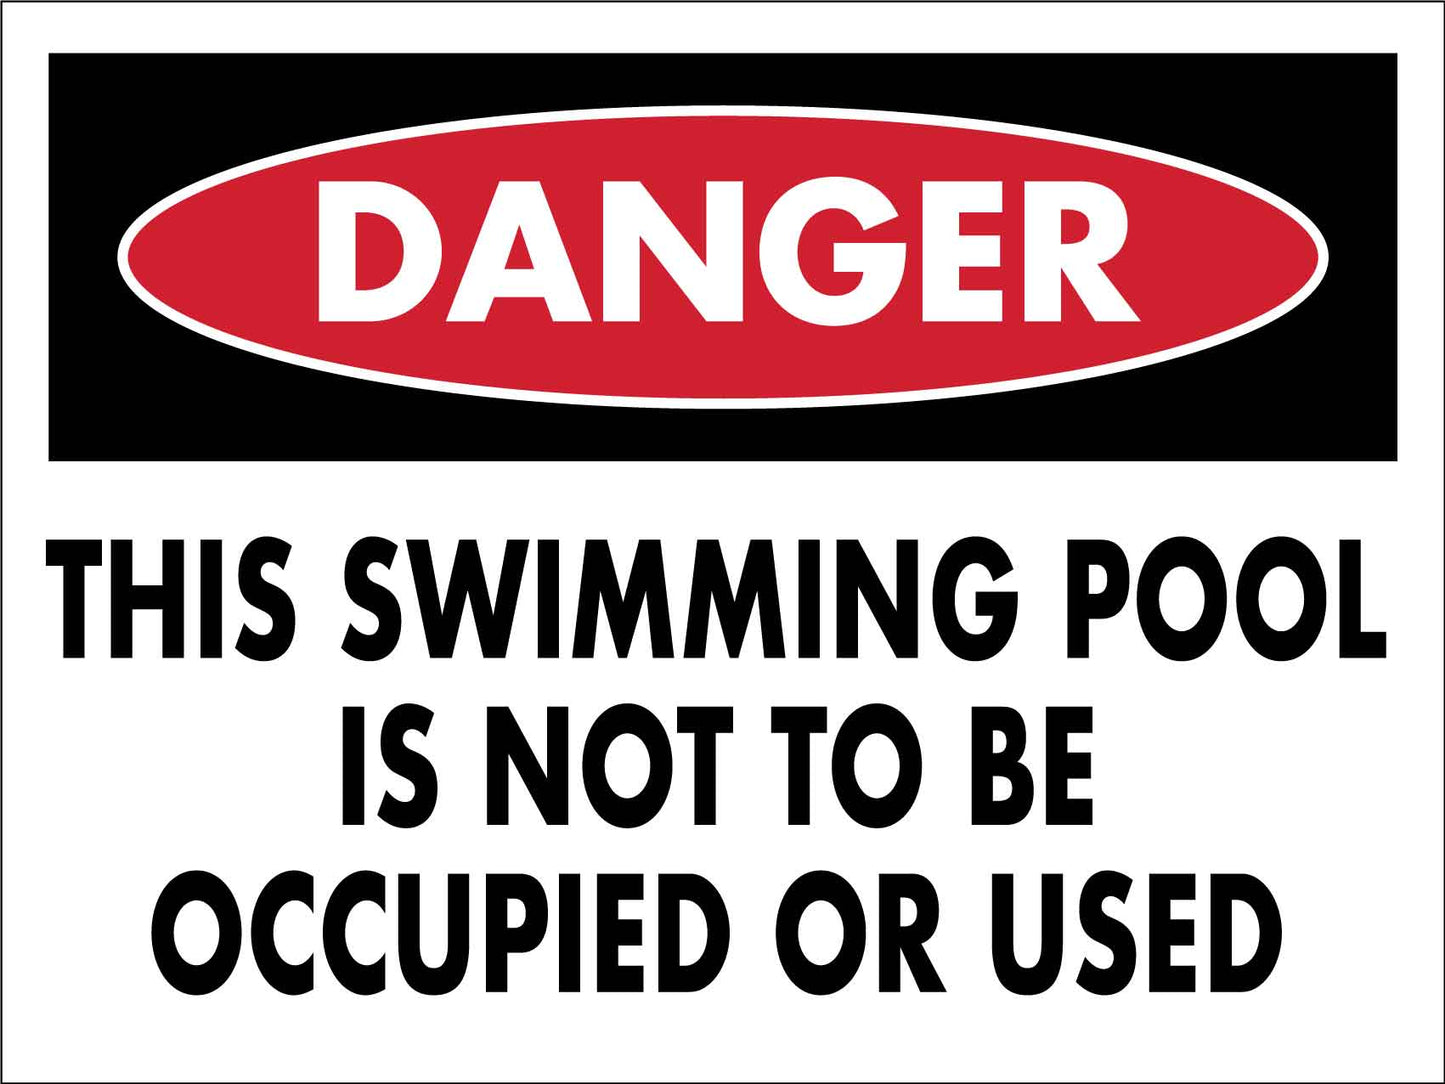 Danger This Swimming Pool Is Not To Be Occupied Or Used Sign